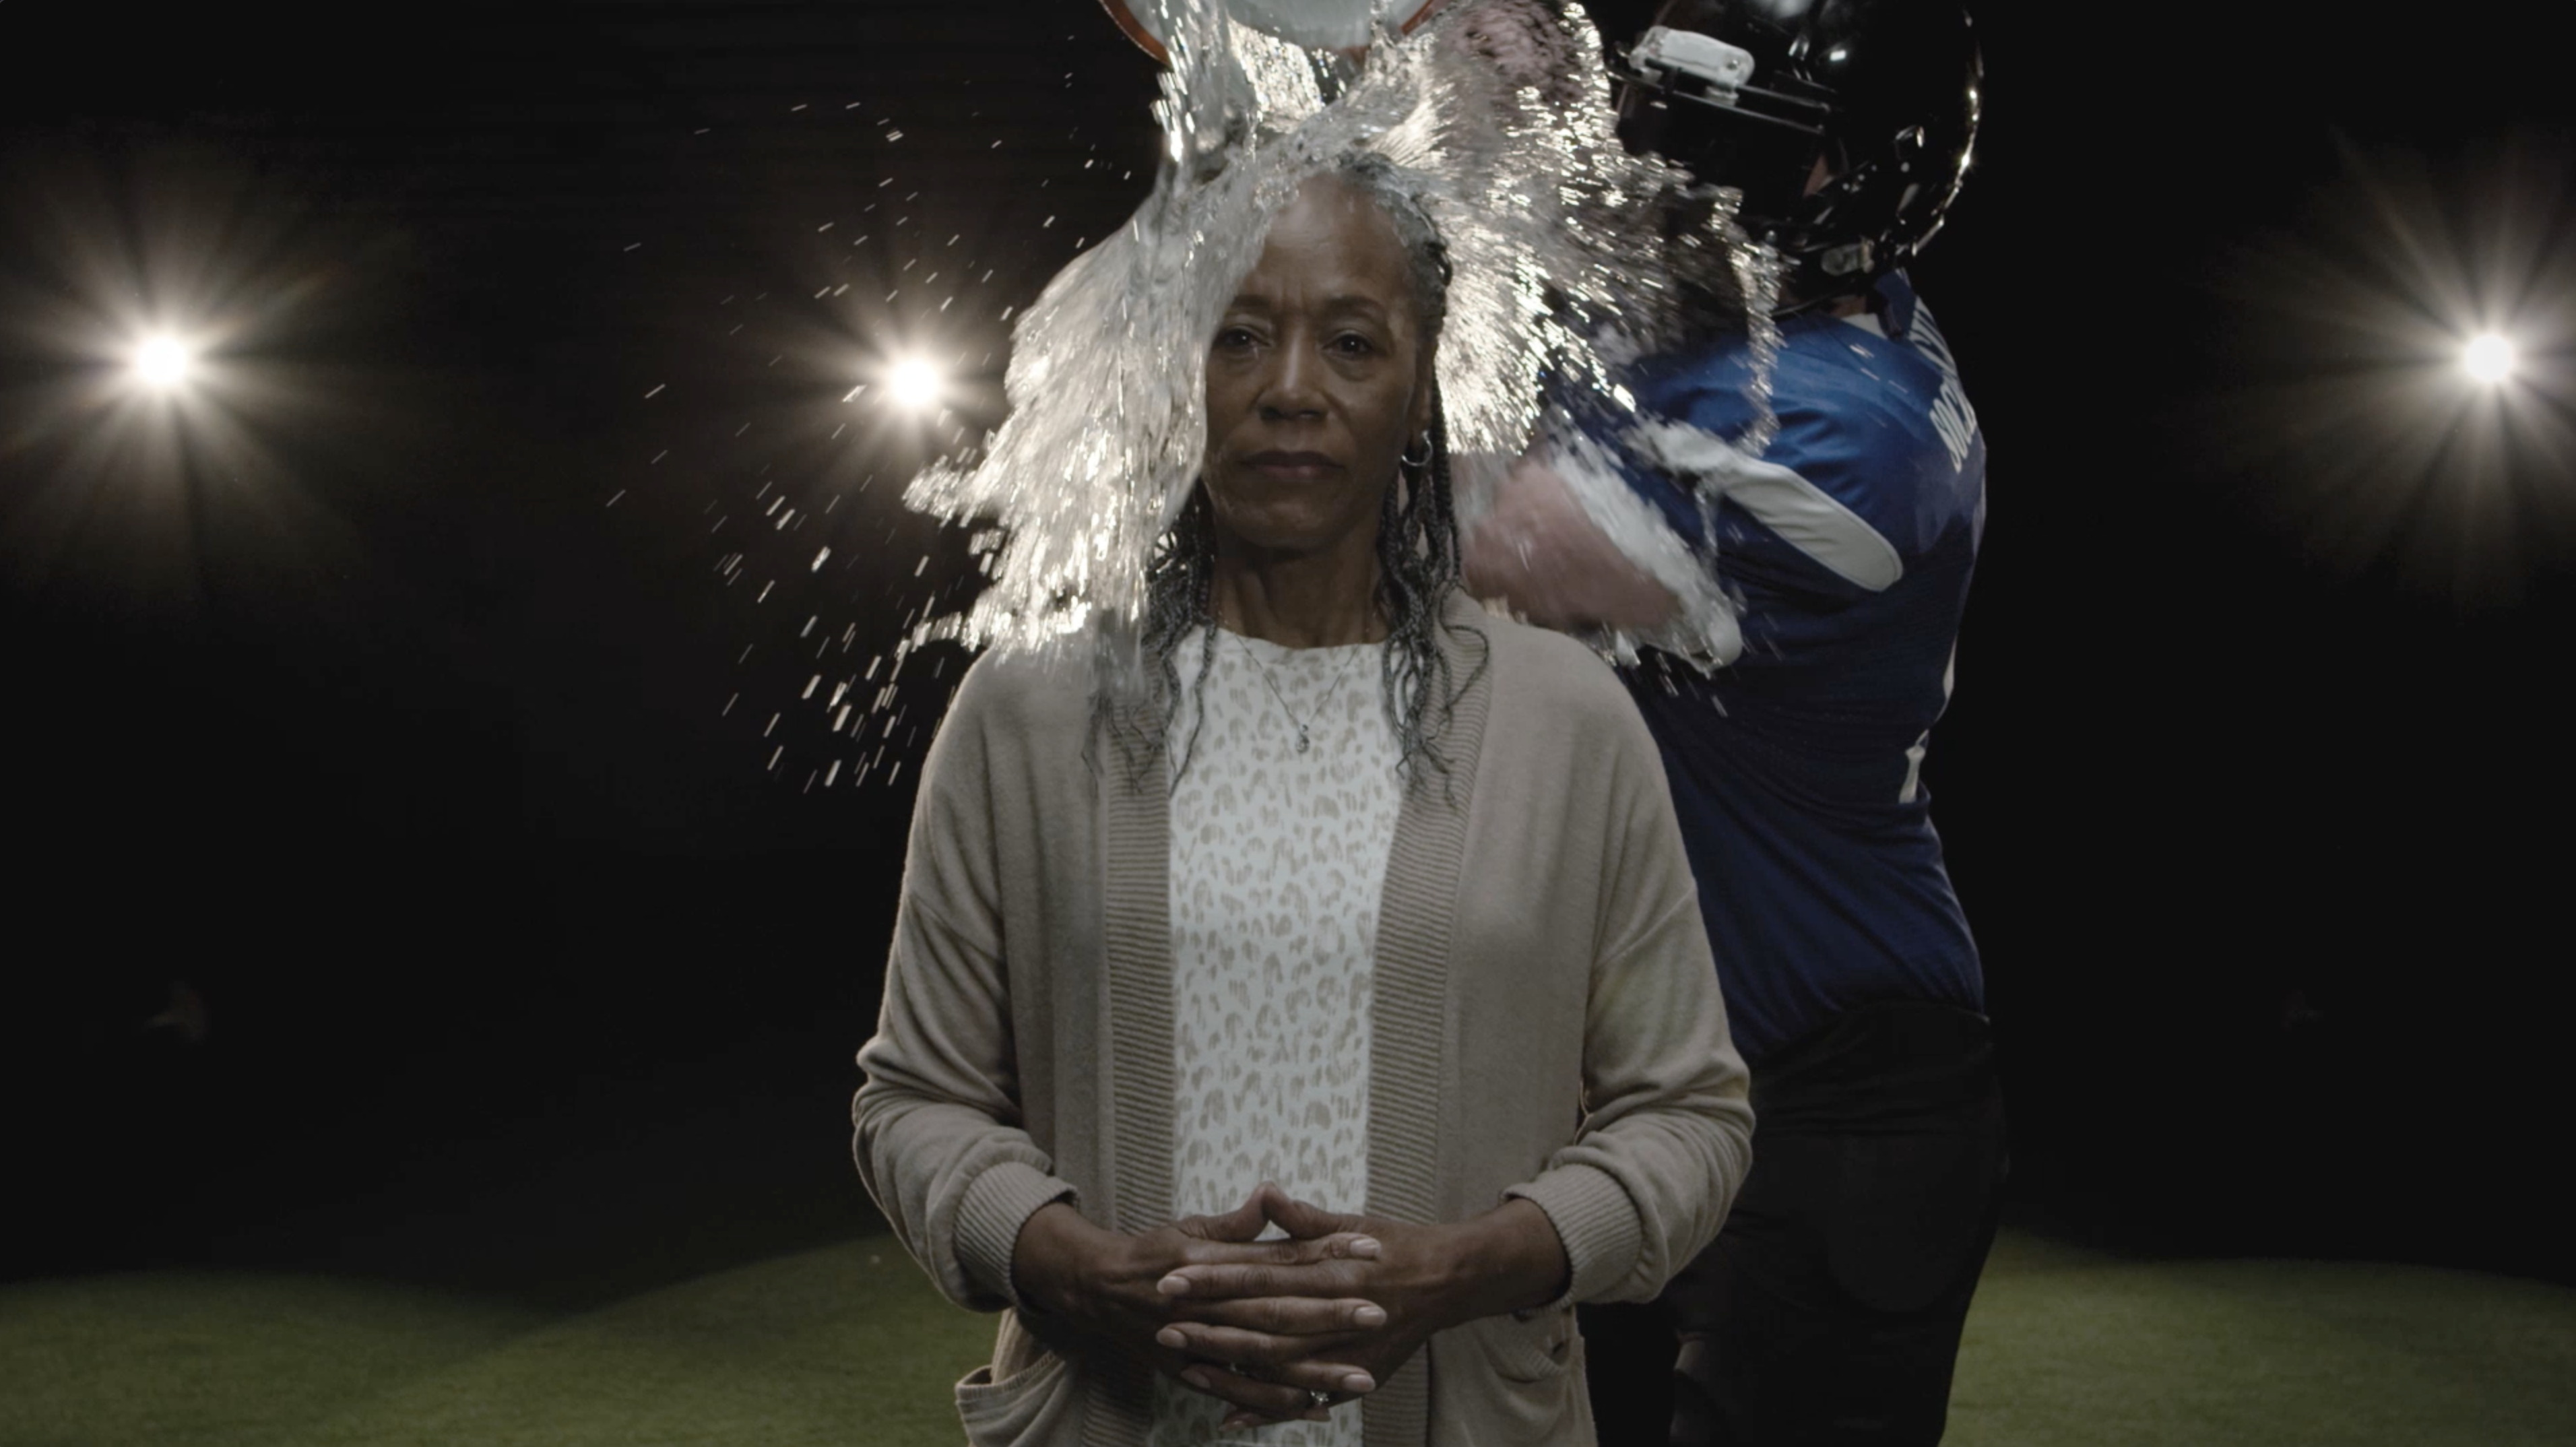 A woman stands looking into the camera with her hands together as a football player dumps a container of water onto her head